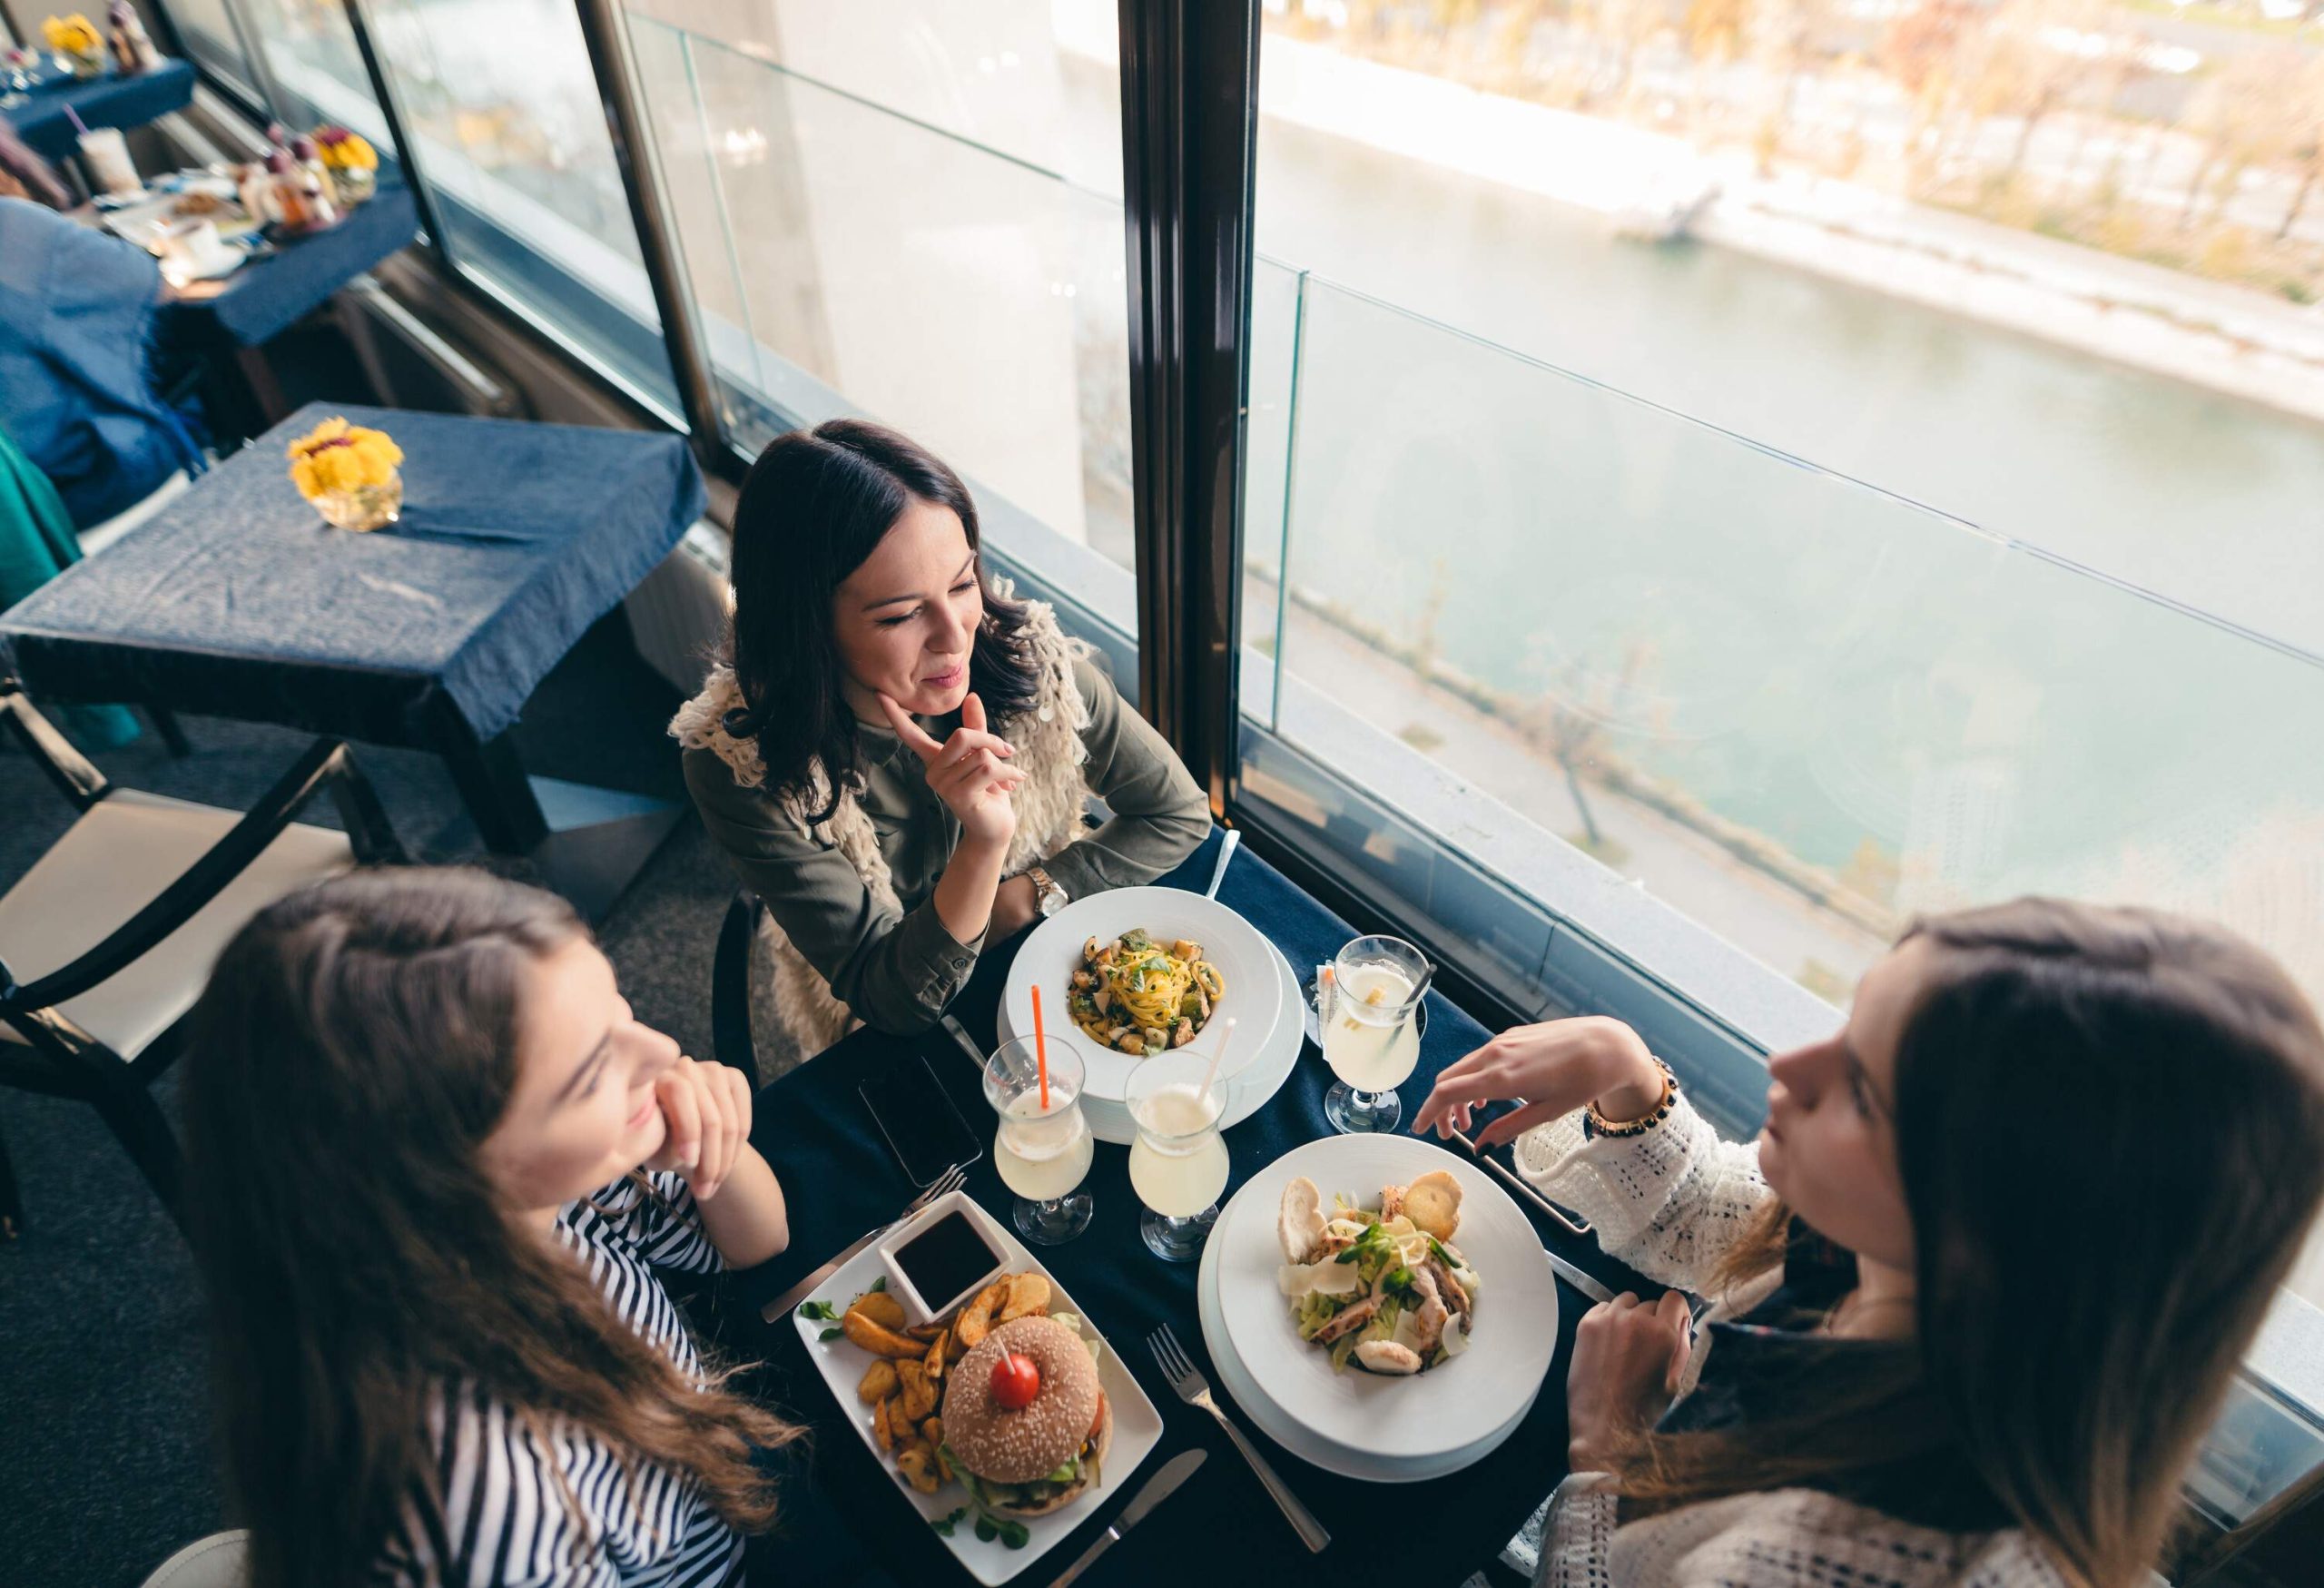 Three women seated at a restaurant table by the window with scrumptious dishes before them.